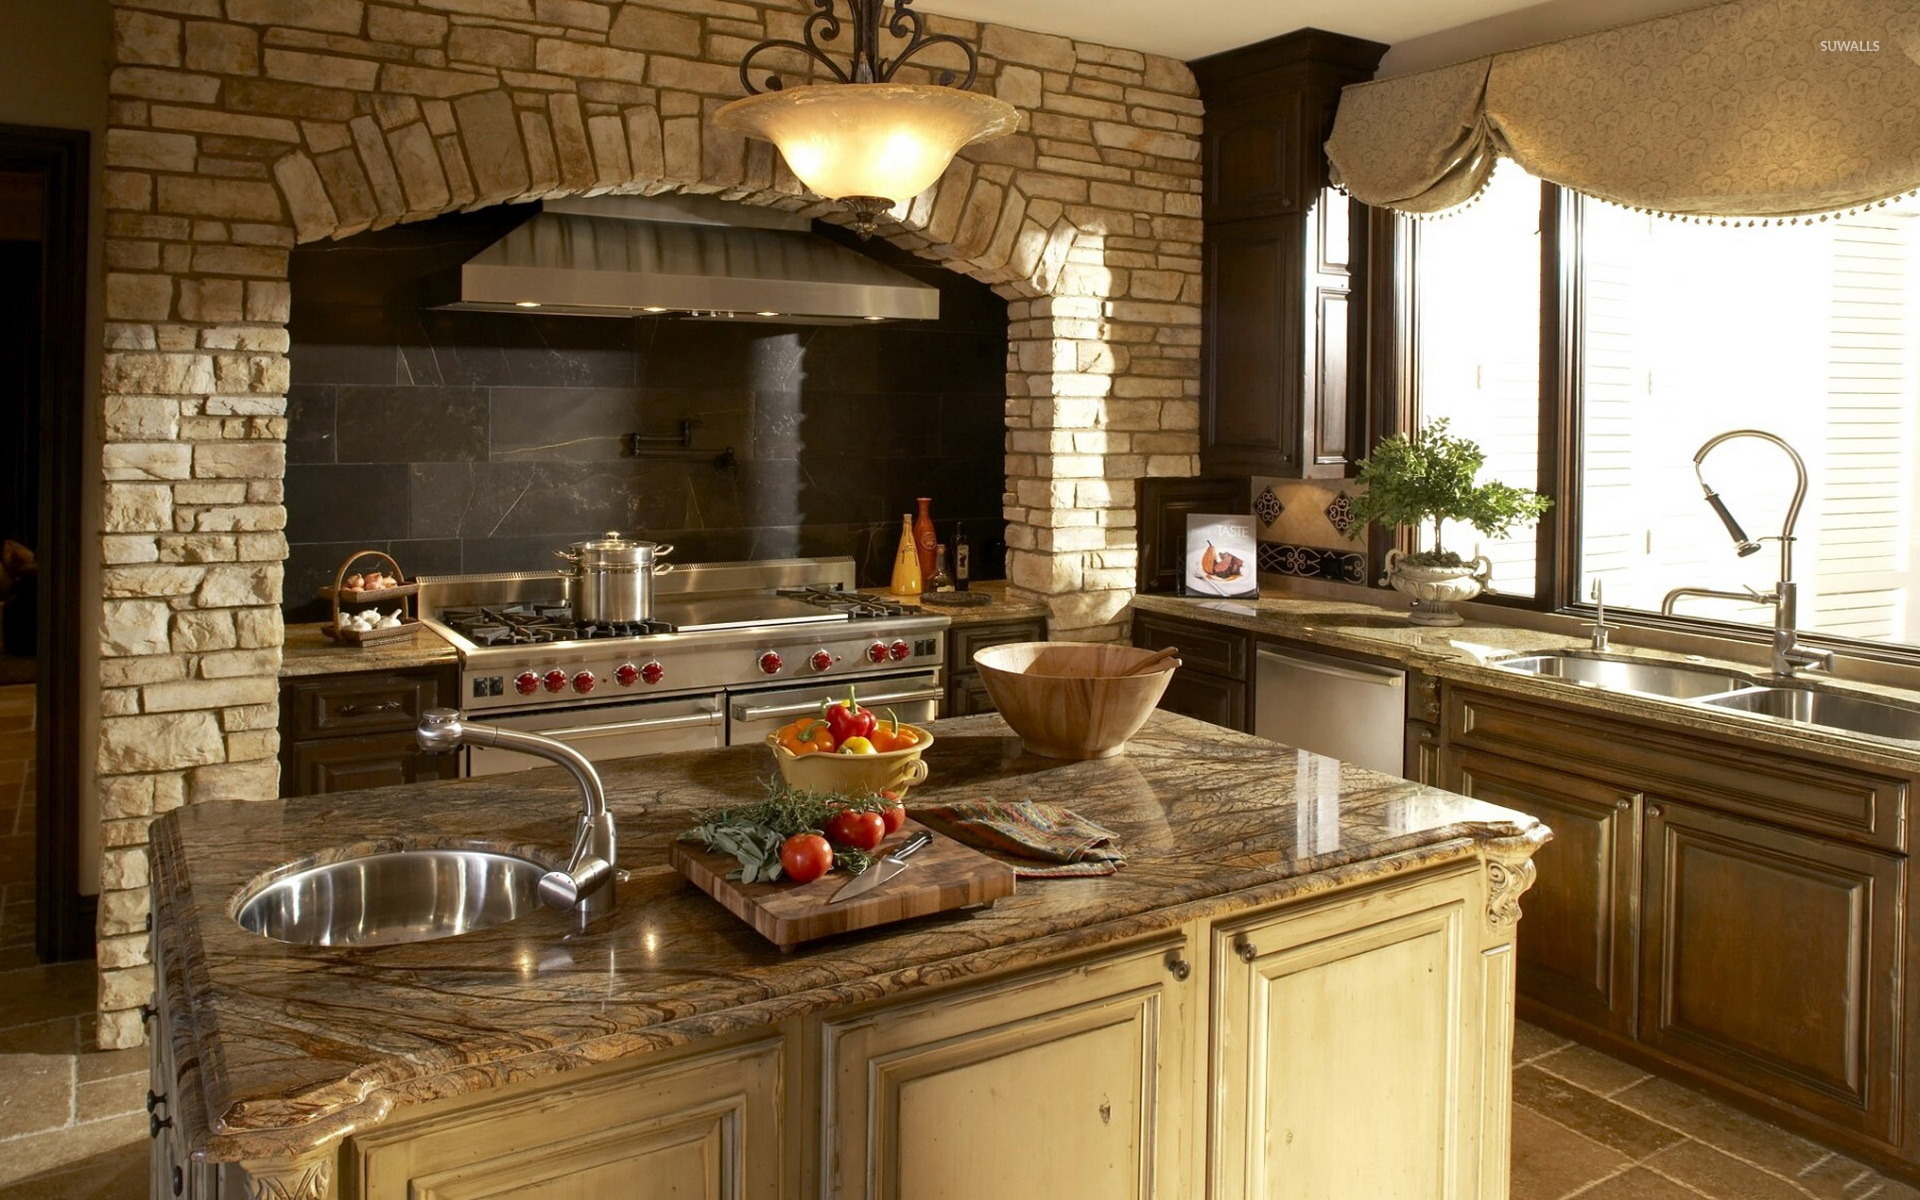 Tuscan kitchen design wallpaper - Photography wallpapers - #39888